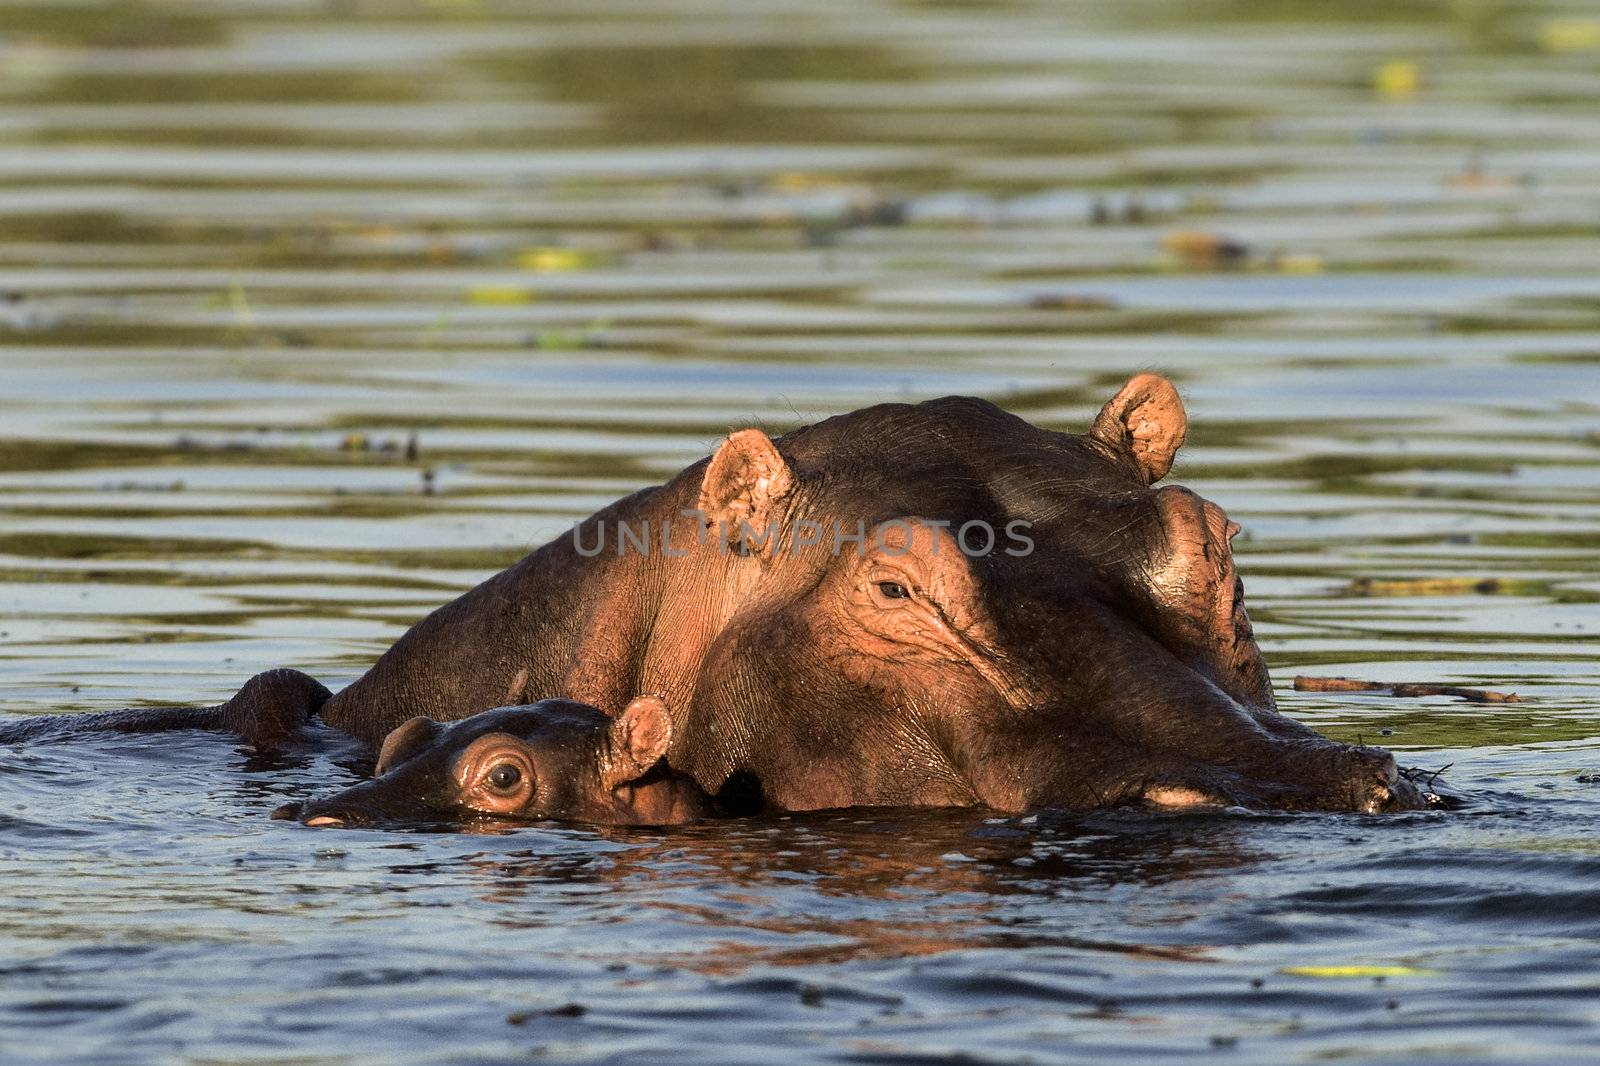 The hippopotamus (Hippopotamus amphibius), or hippo, from the ancient Greek for "river horse", is a large, mostly herbivorous mammal in sub-Saharan Africa, and one of only two extant species in the family Hippopotamidae./